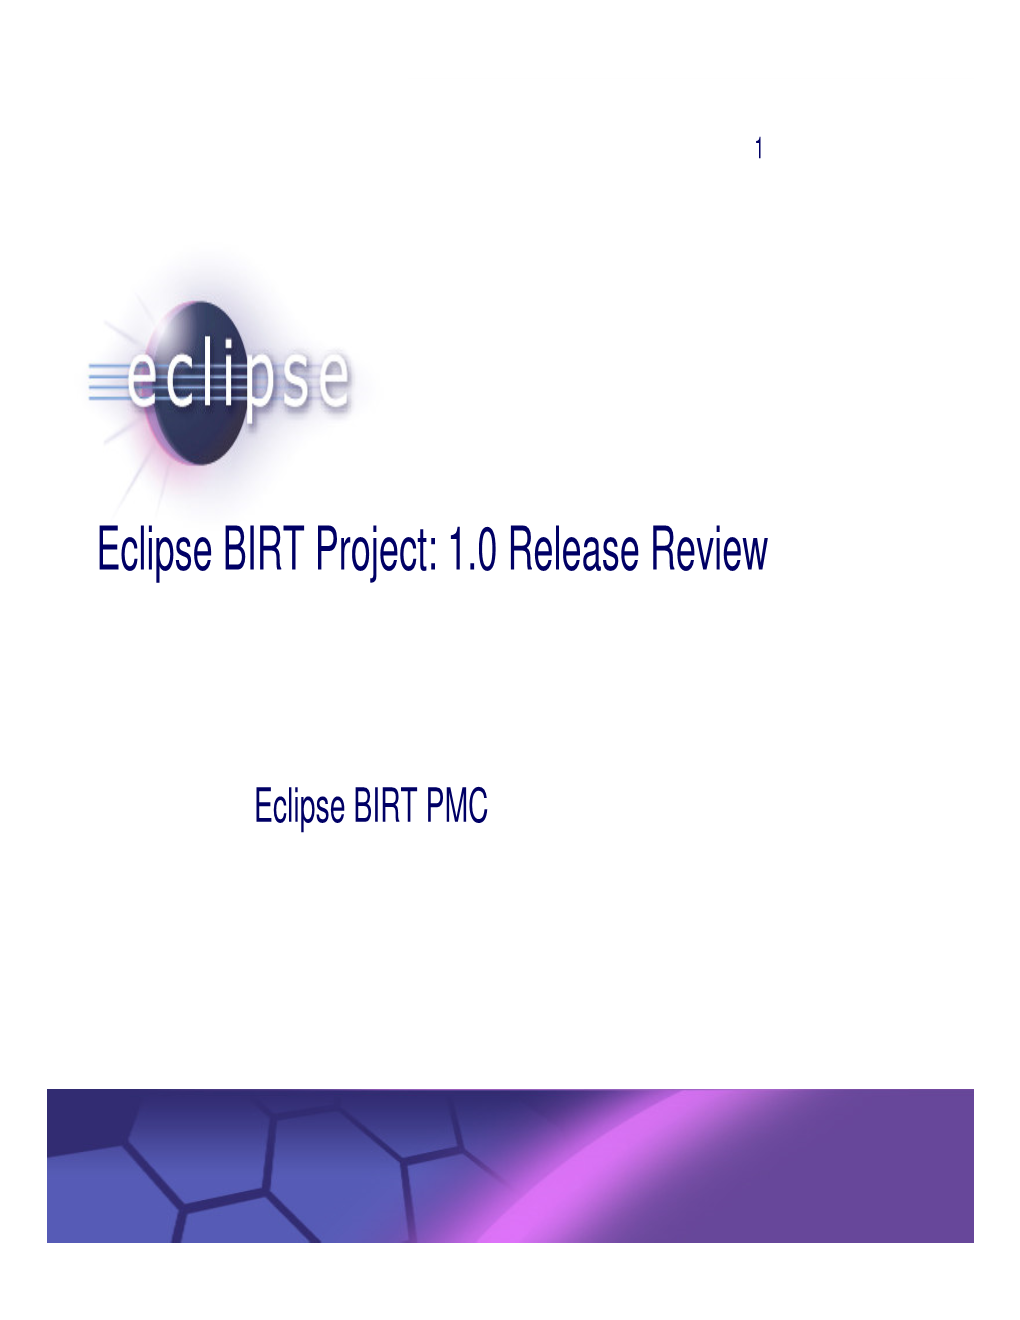 Eclipse BIRT Project: 1.0 Release Review